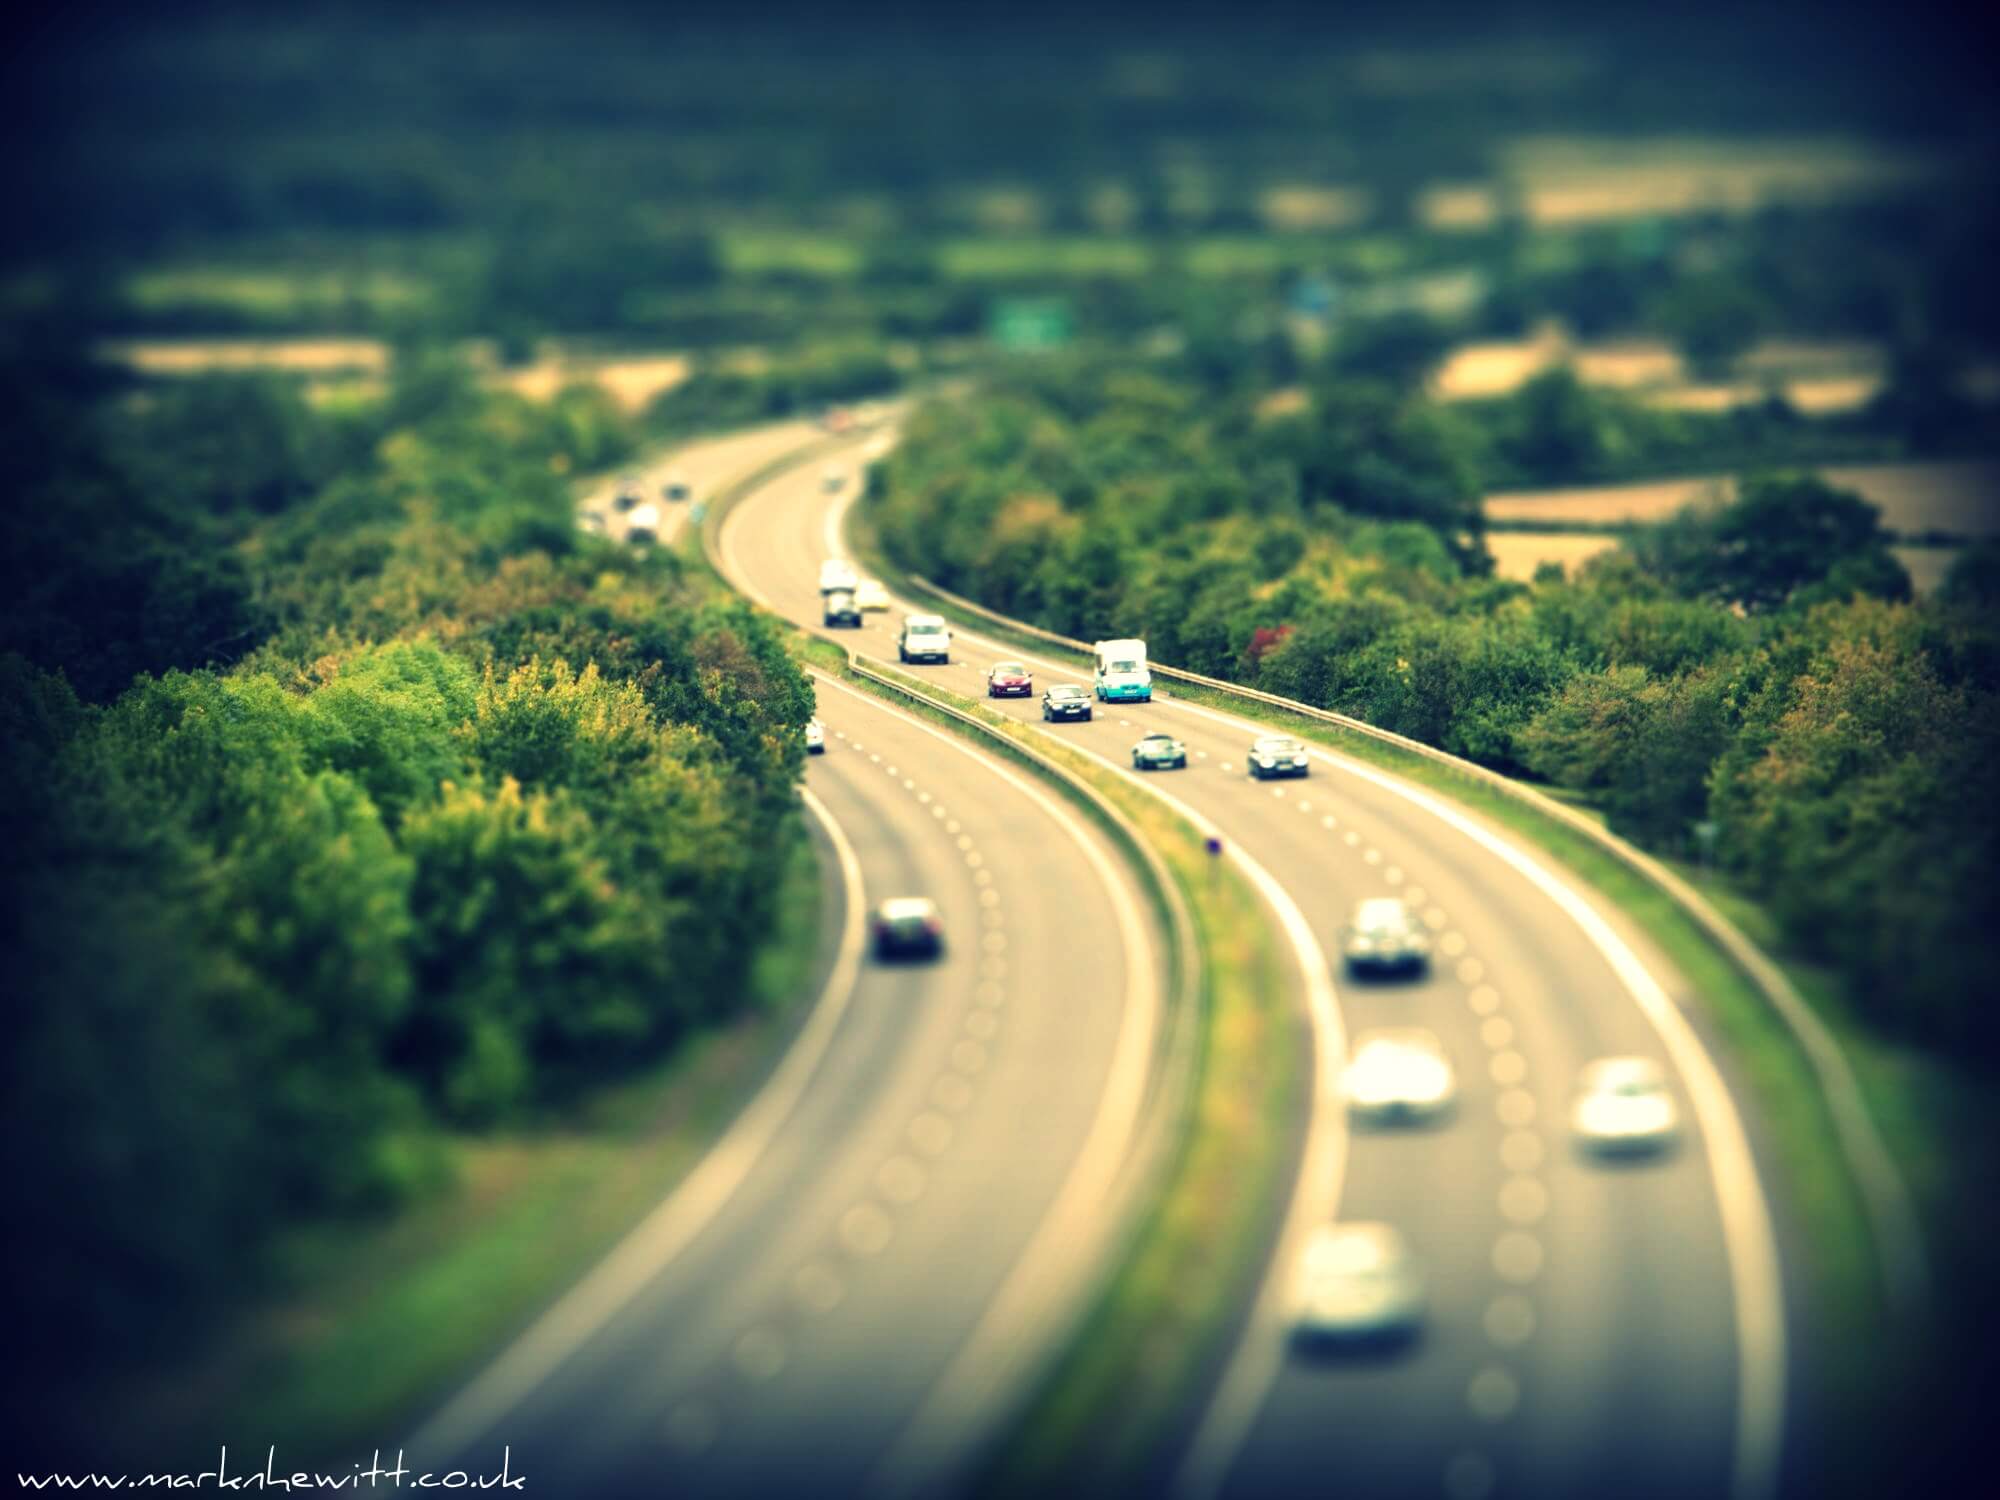 Tilt-shifted Image of Burton Bridge over the Lincoln A46 bypass